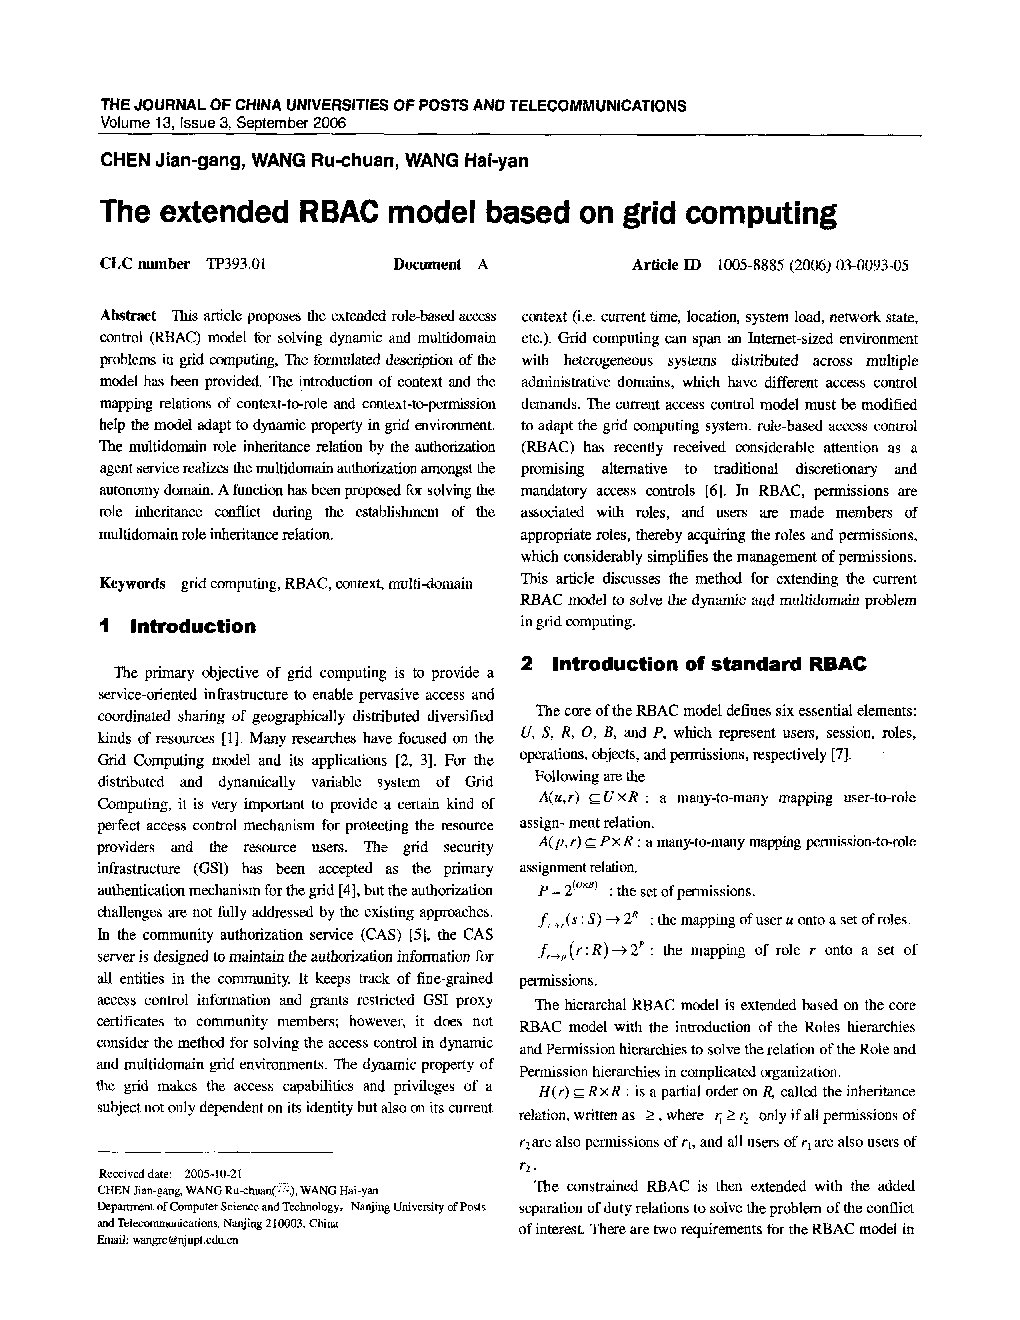 The extended RBAC model based on grid computing